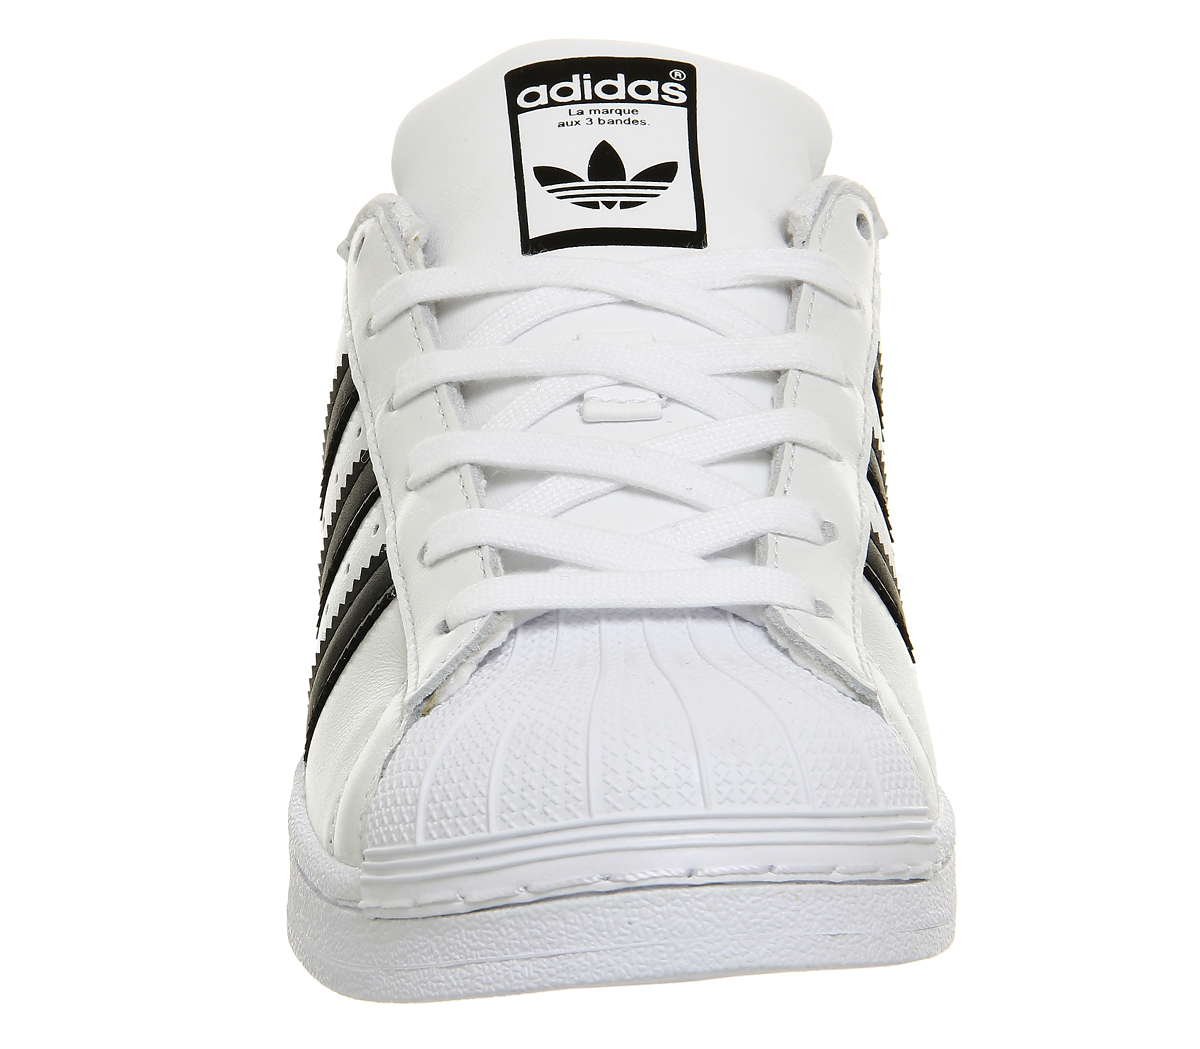 adidas shoes with front view